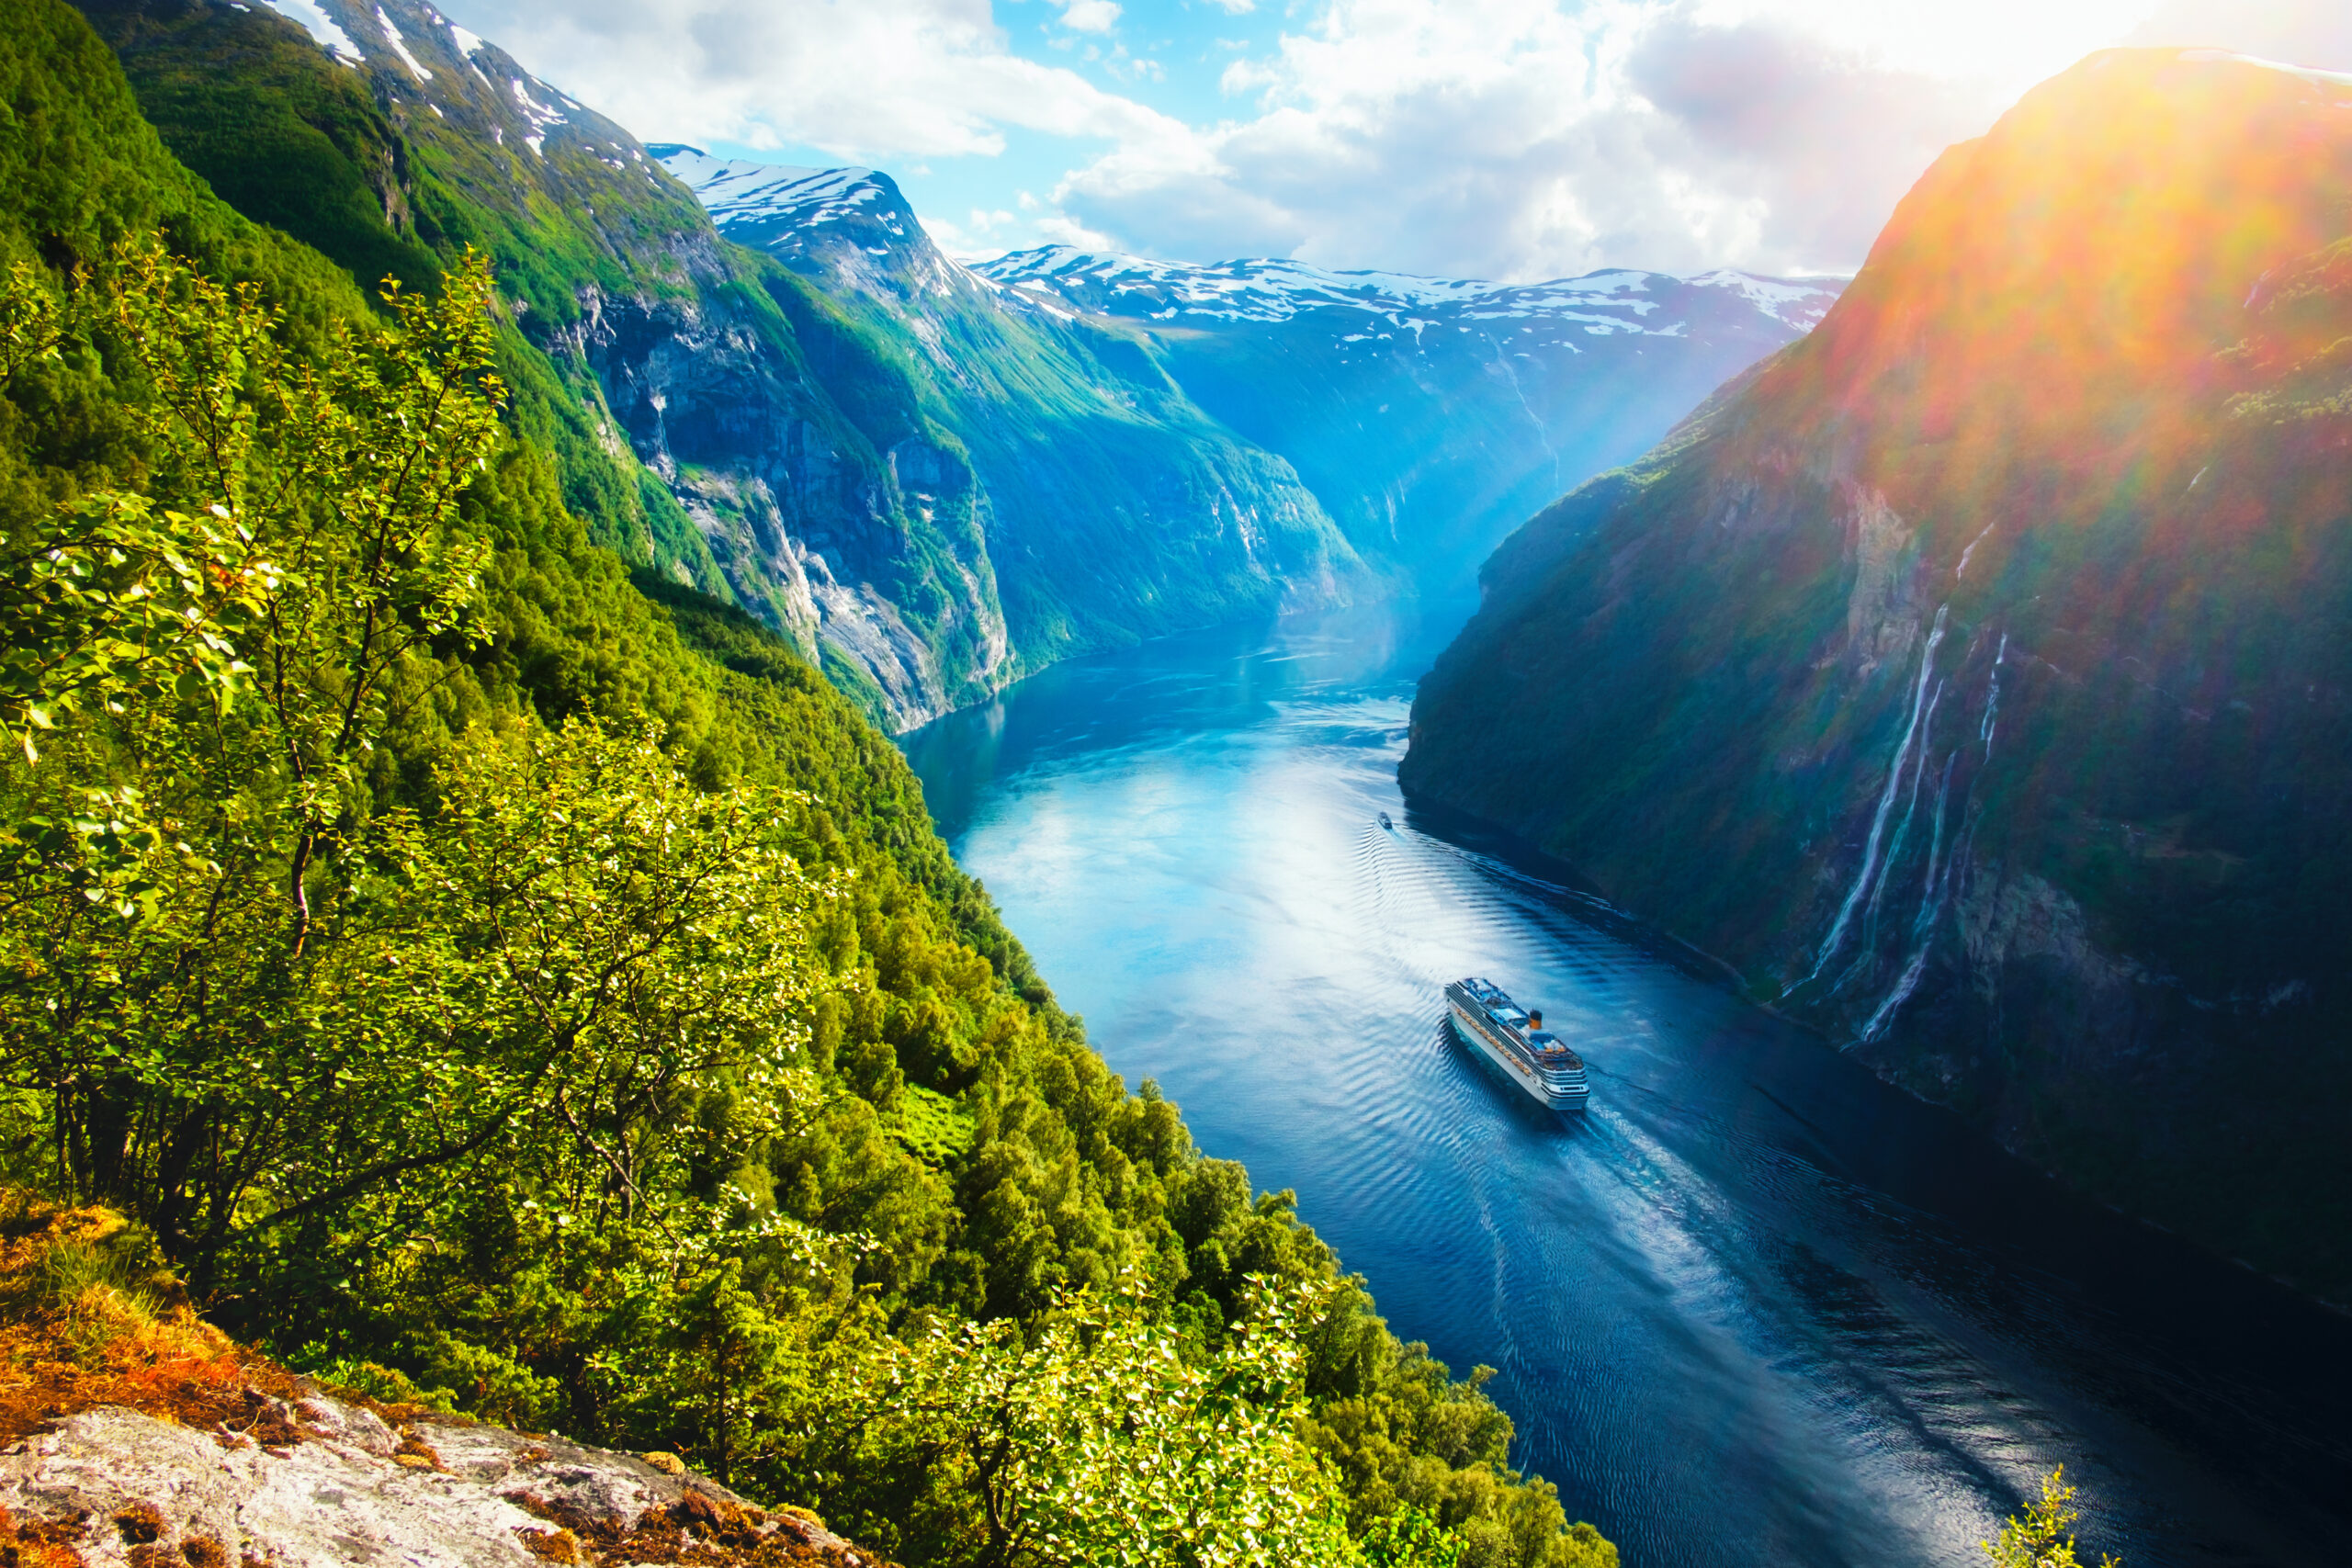 Breathtaking view of the Sunnylvsfjorden fjord with cruise ship and famous Seven Sisters waterfalls in Norway (Photo Credit: Smit / Shutterstock)